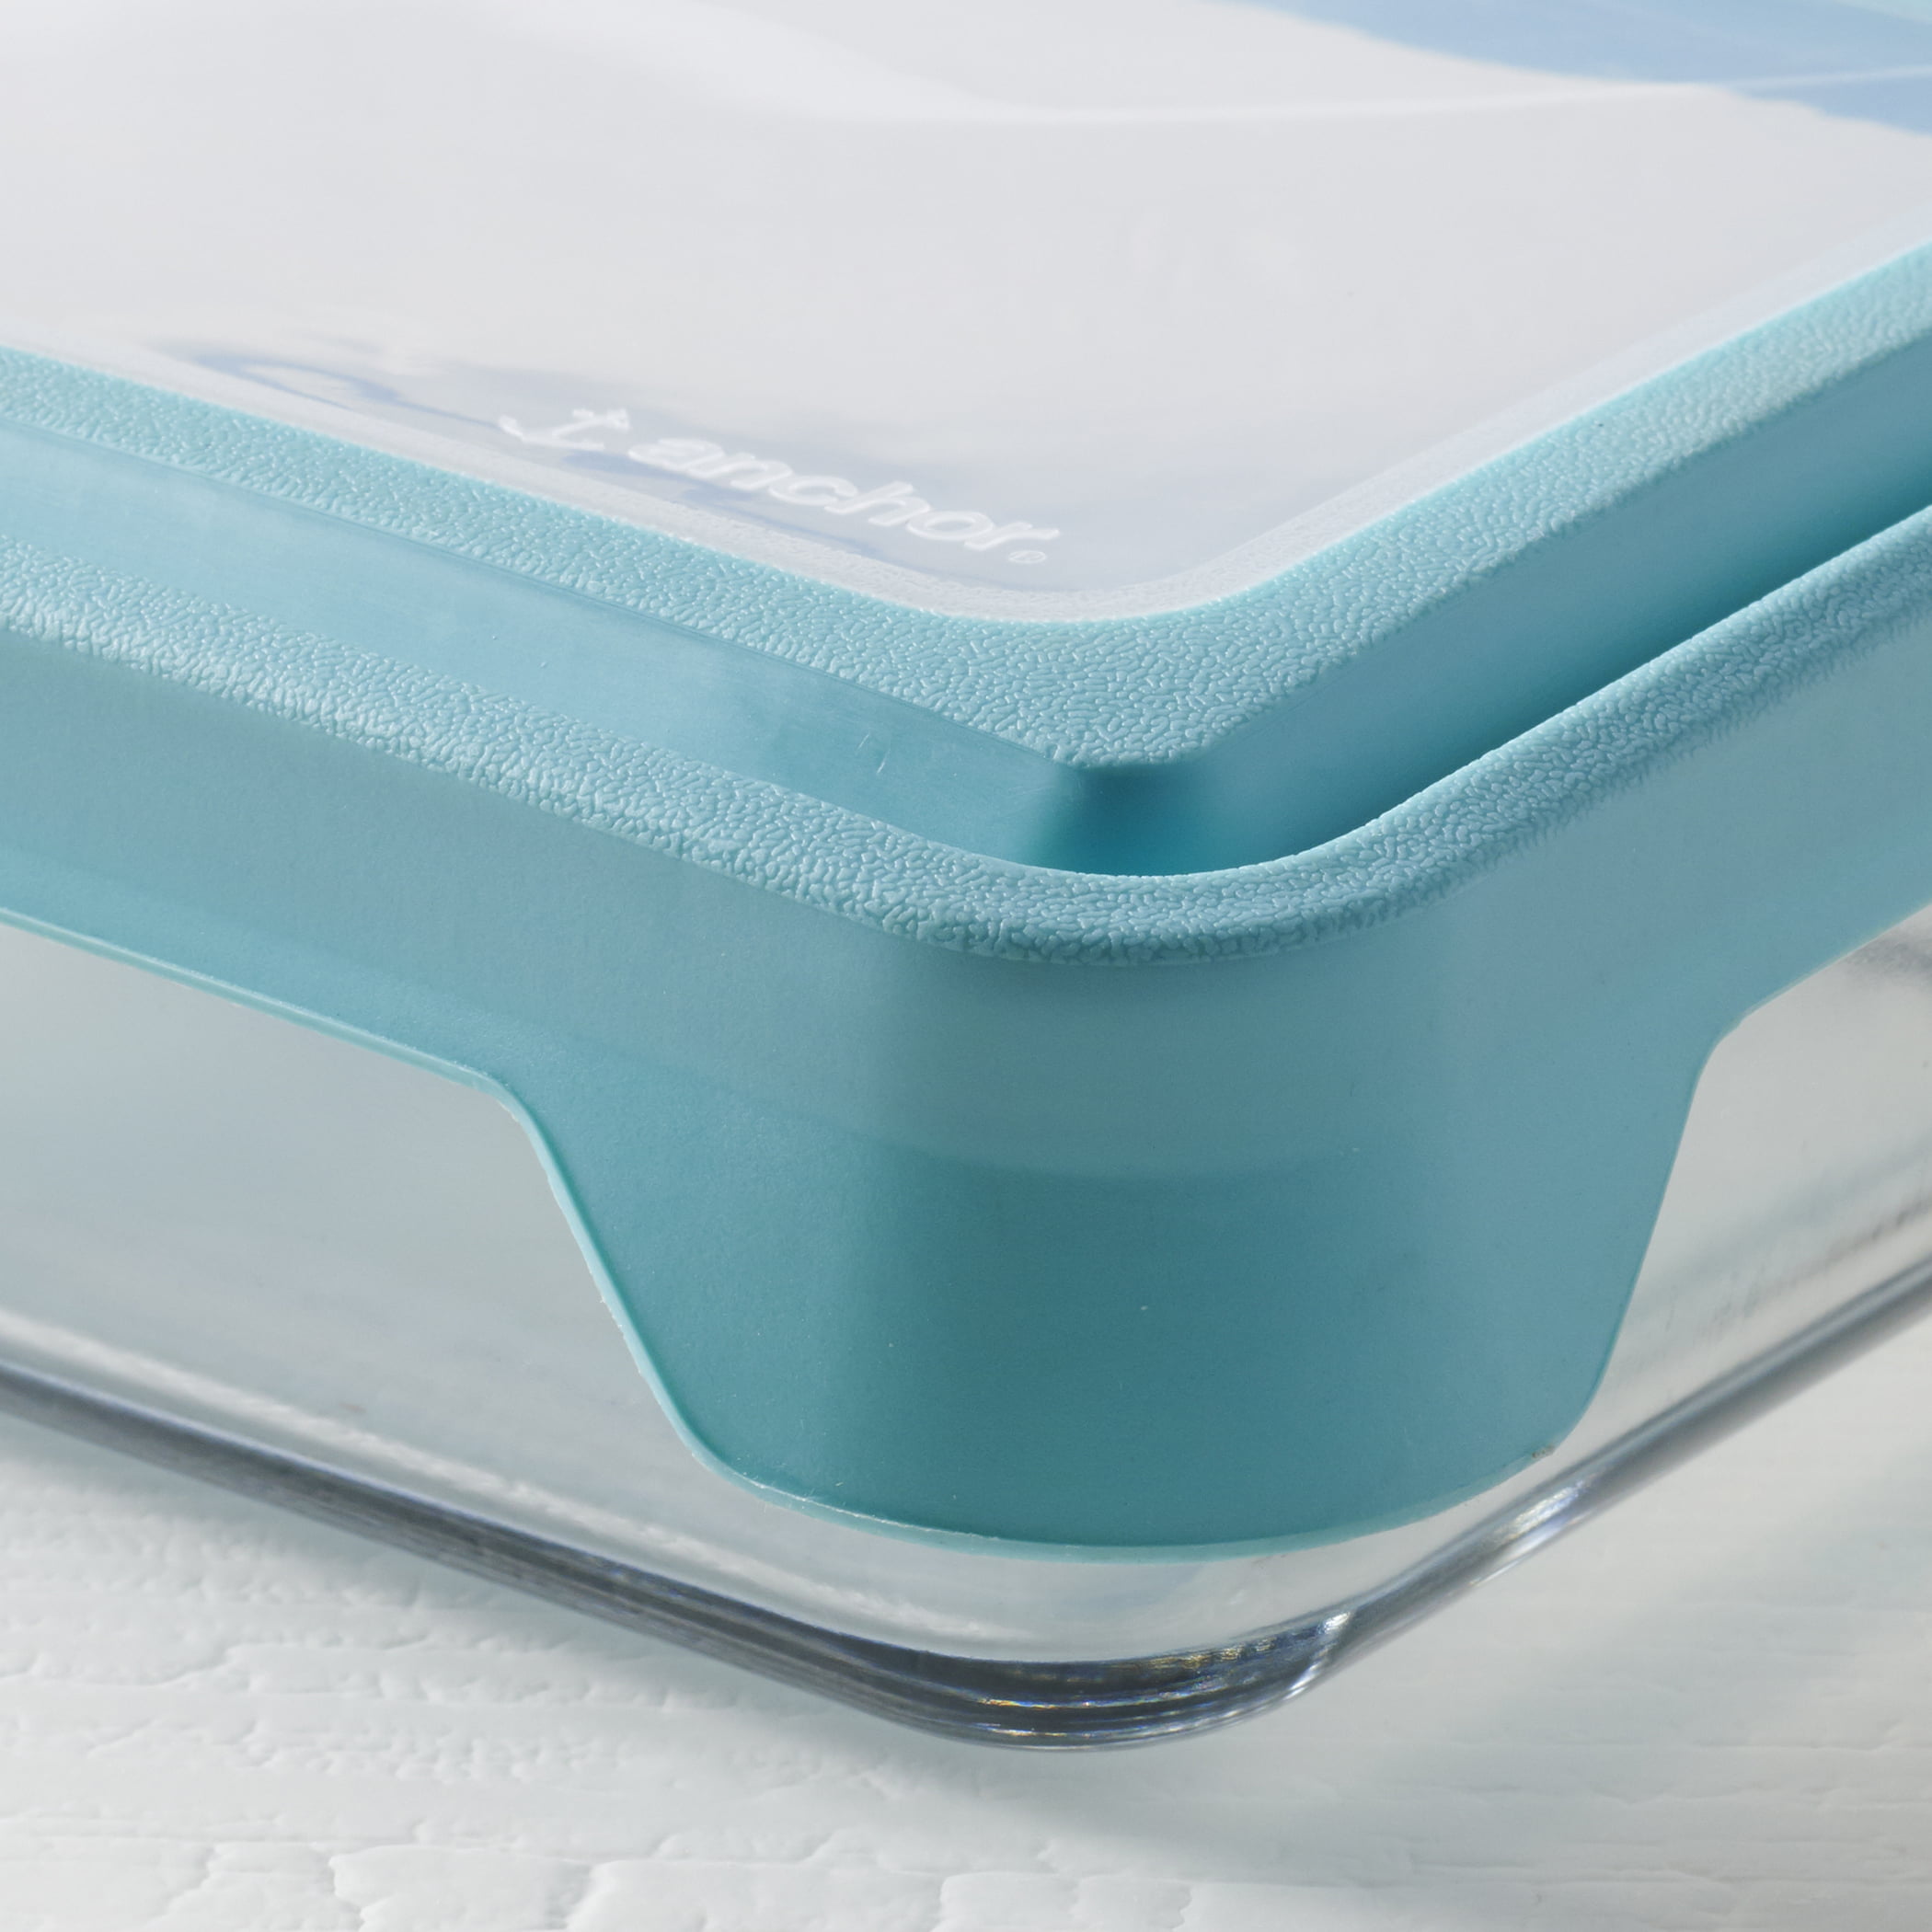 Anchor Hocking 13099ahg17 TrueSeal 7 Cups Food Storage Container, Blue